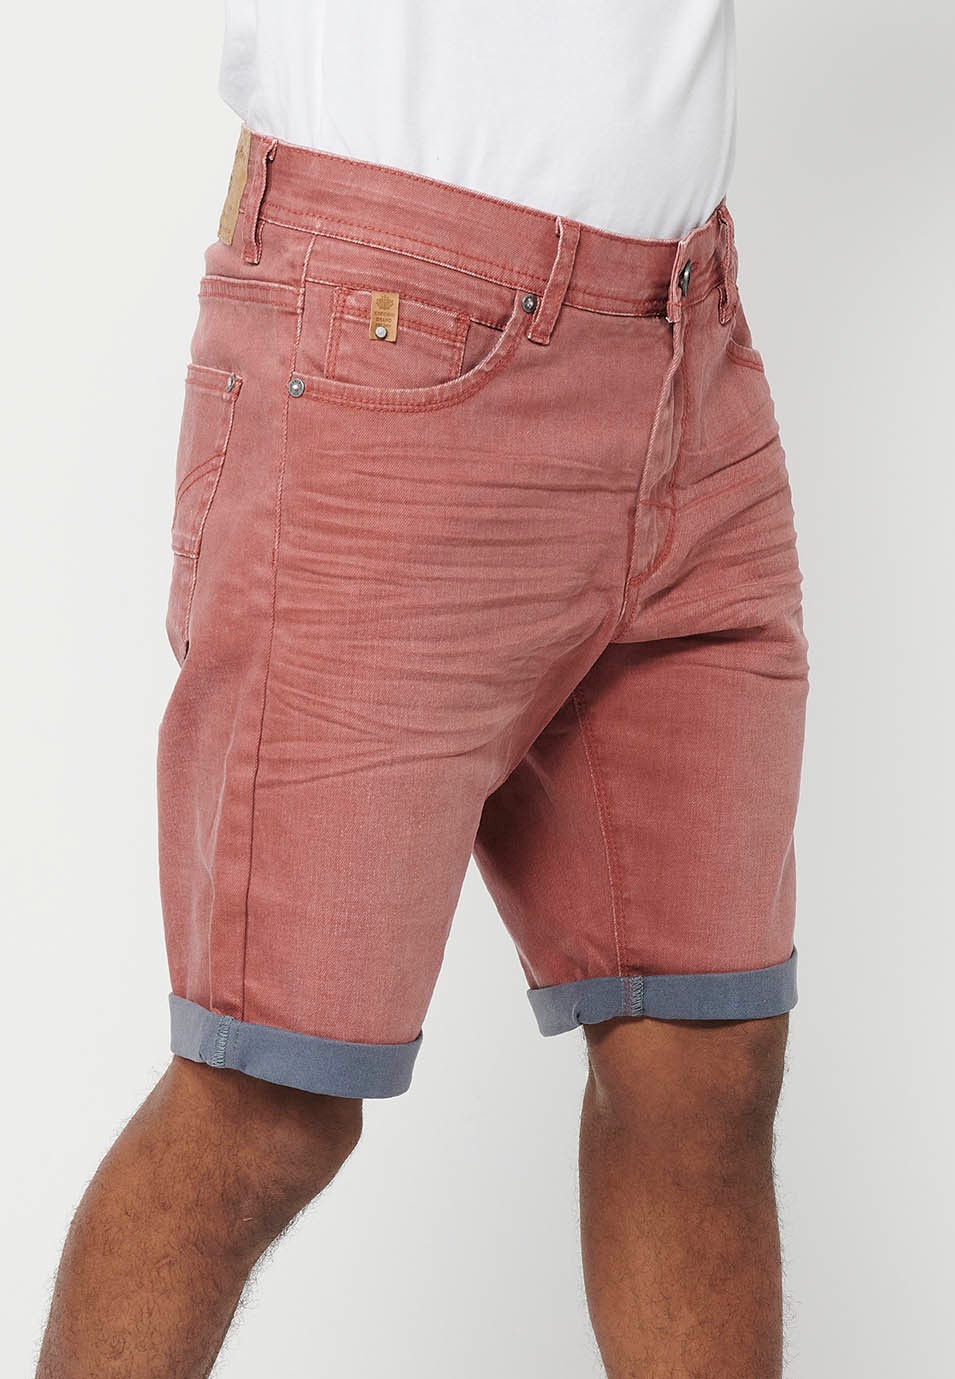 Denim Bermuda shorts with turn-up finish, front closure with zipper and button with five pockets, one pocket in Maroon Color for Men 2